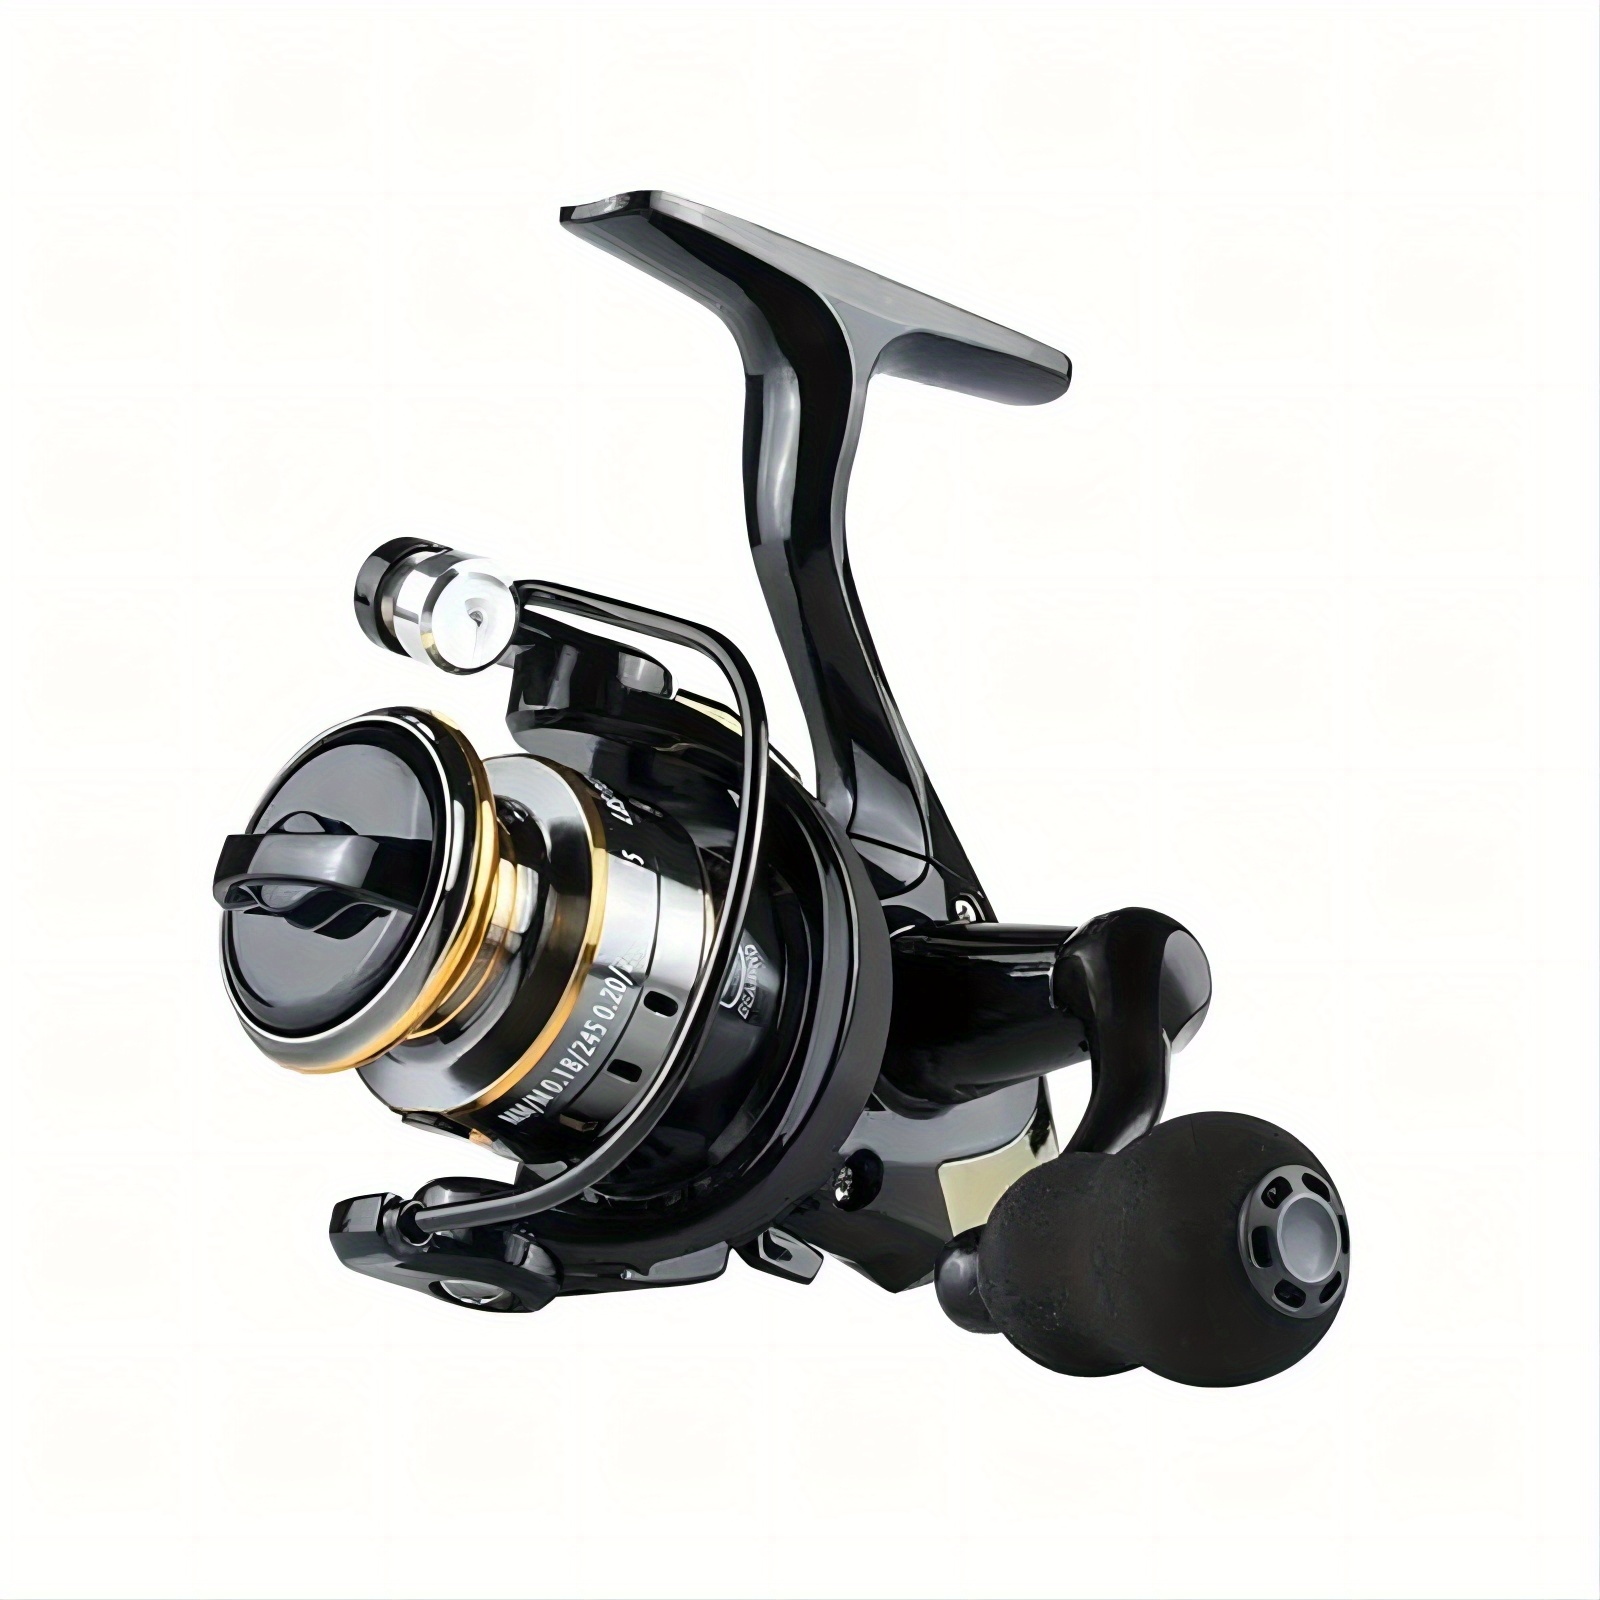 Cherish 13axis 5.2 :1 Speed Ration Spool Spinning Wheel Reel Fishing Reel Fishing Equipment 7000 Fishing Reel Other